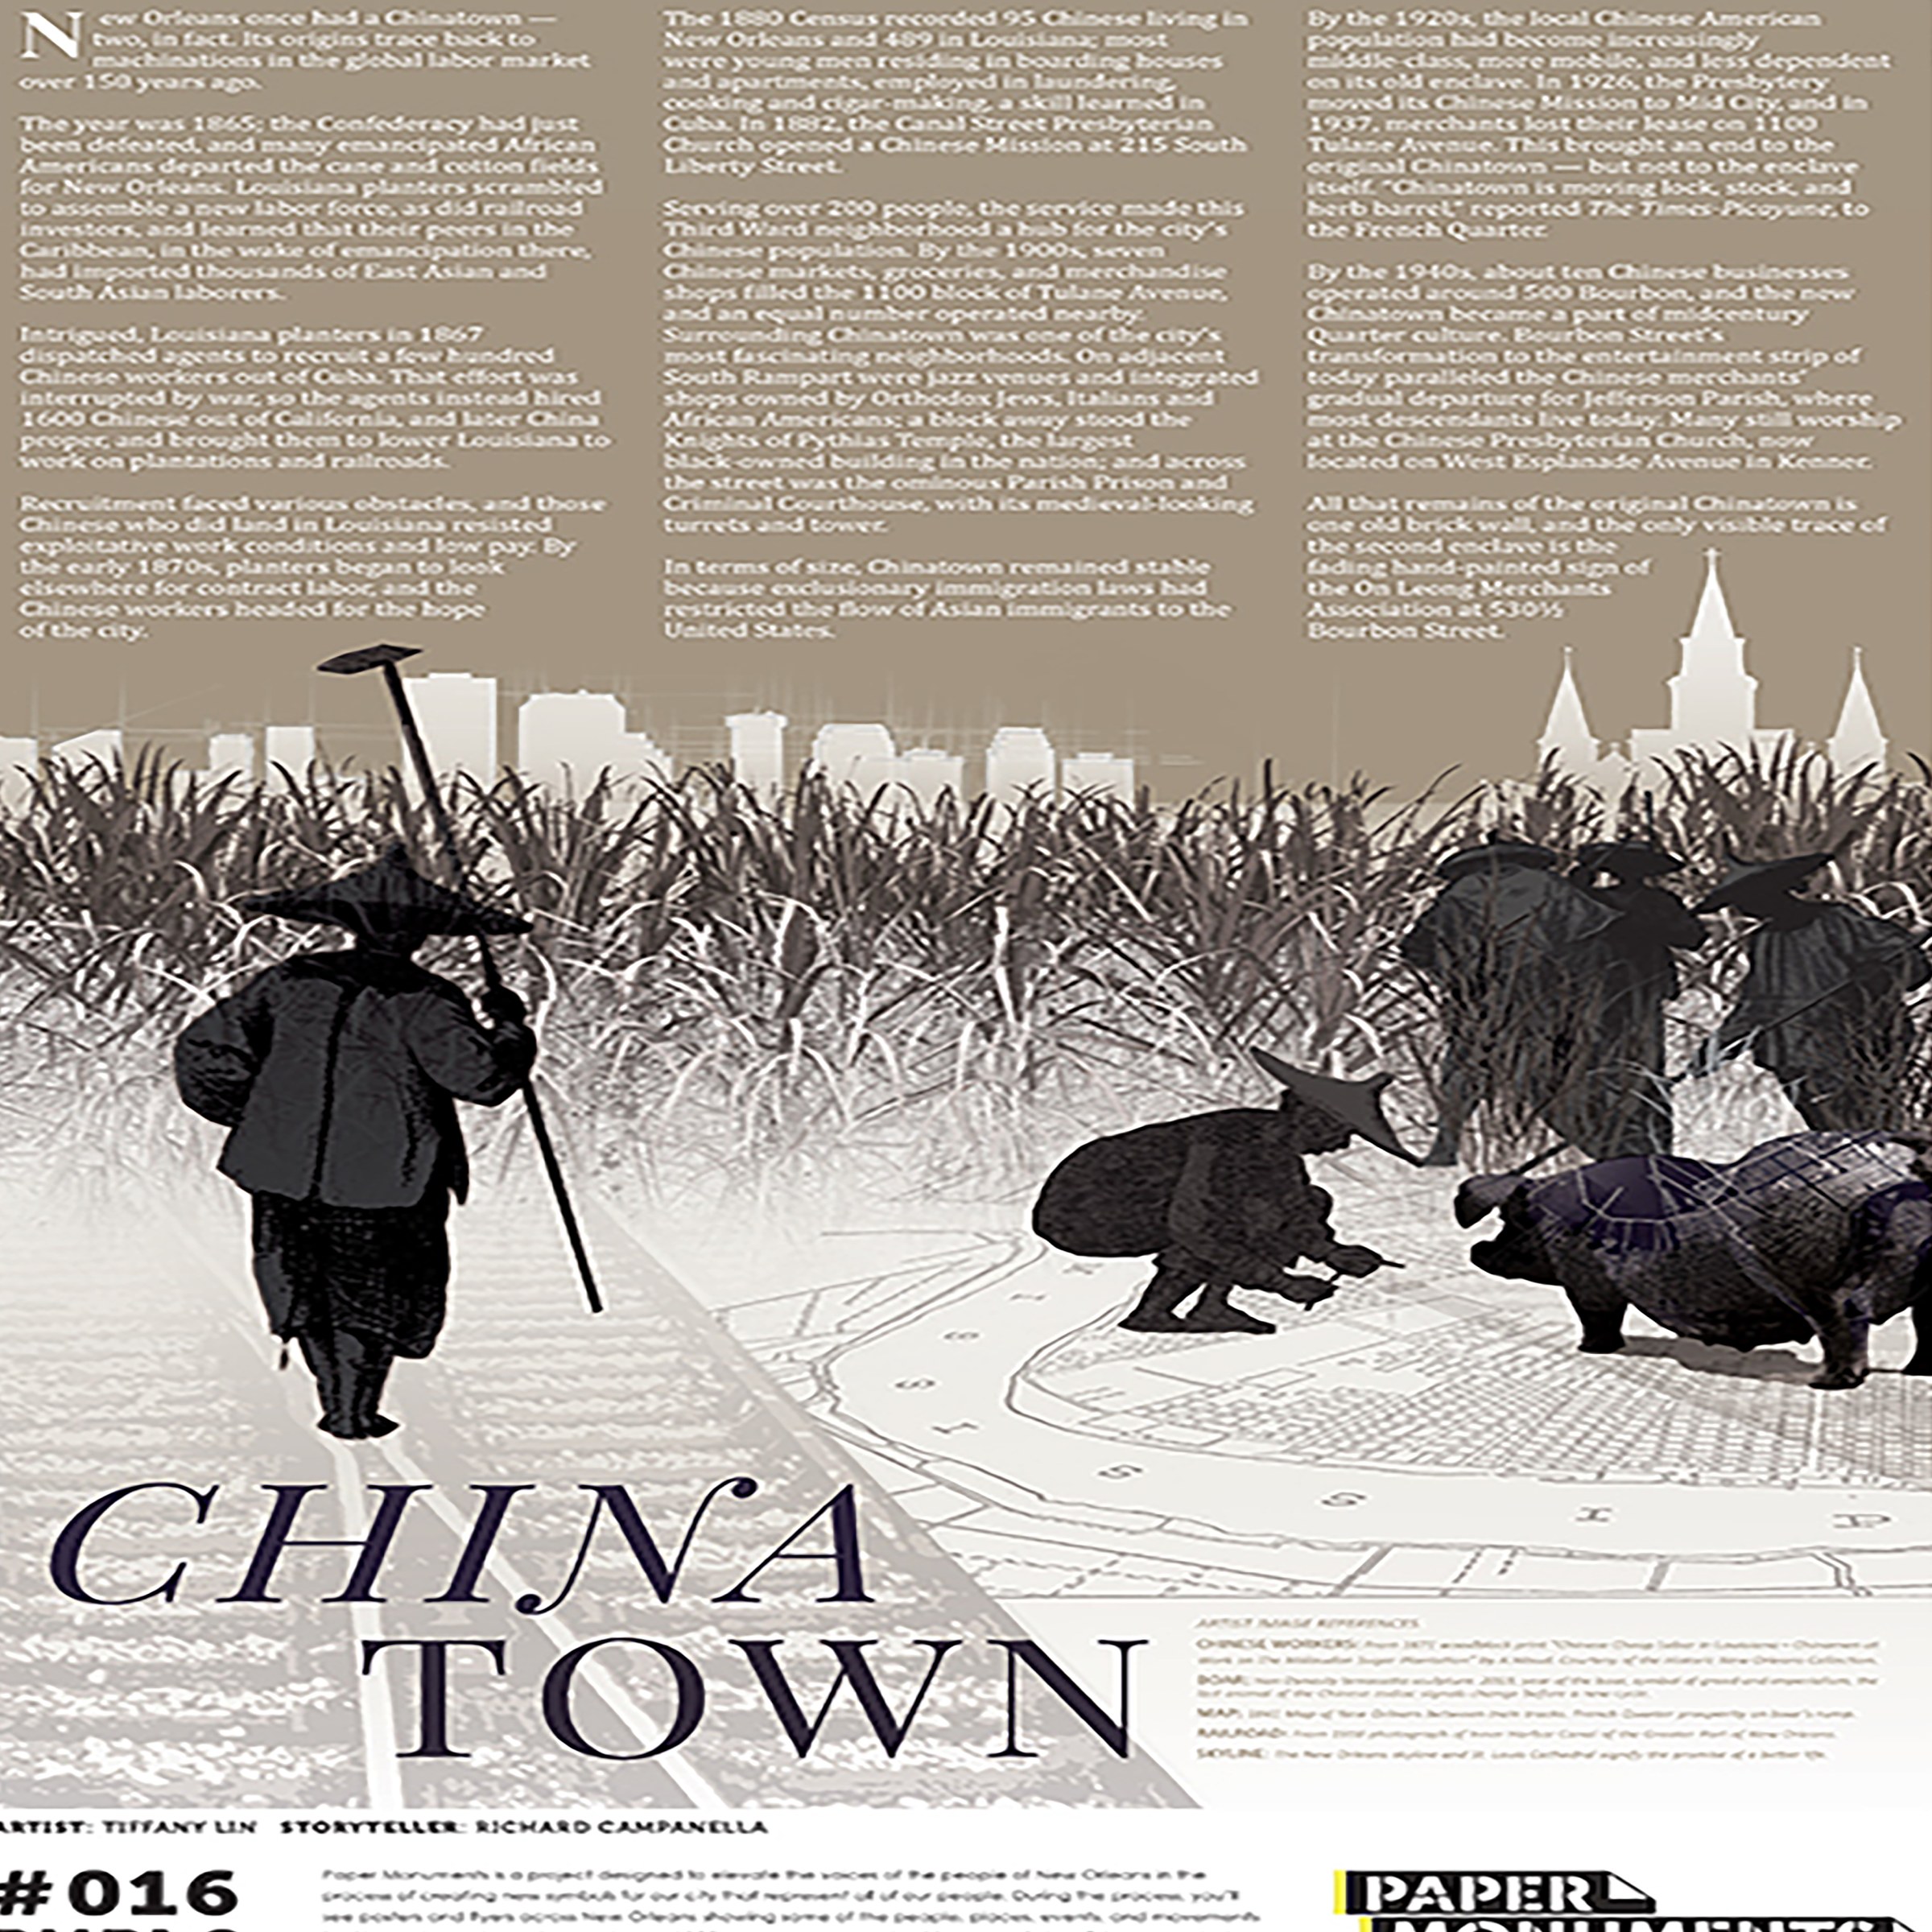 poster showing china town with text in the sky